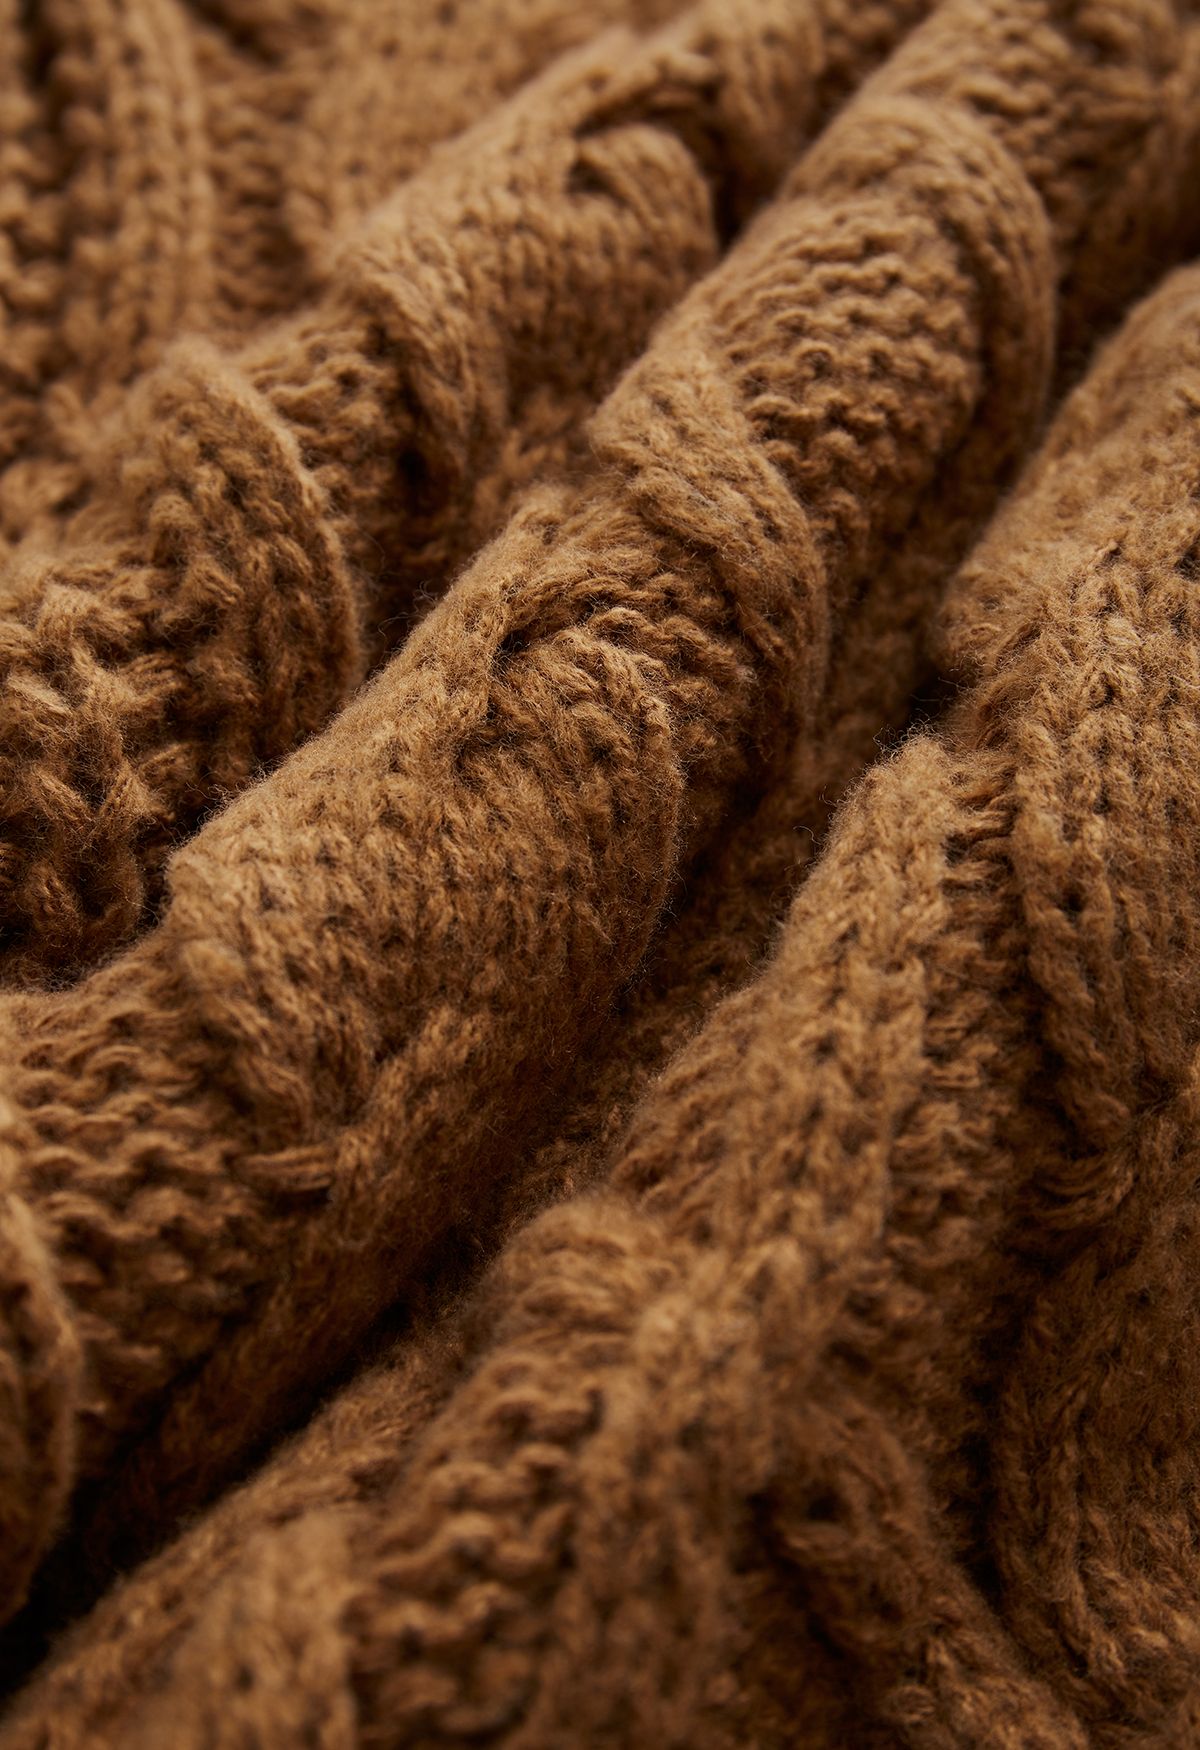 Bubble Sleeve Braided Ribbed Sweater in Tan